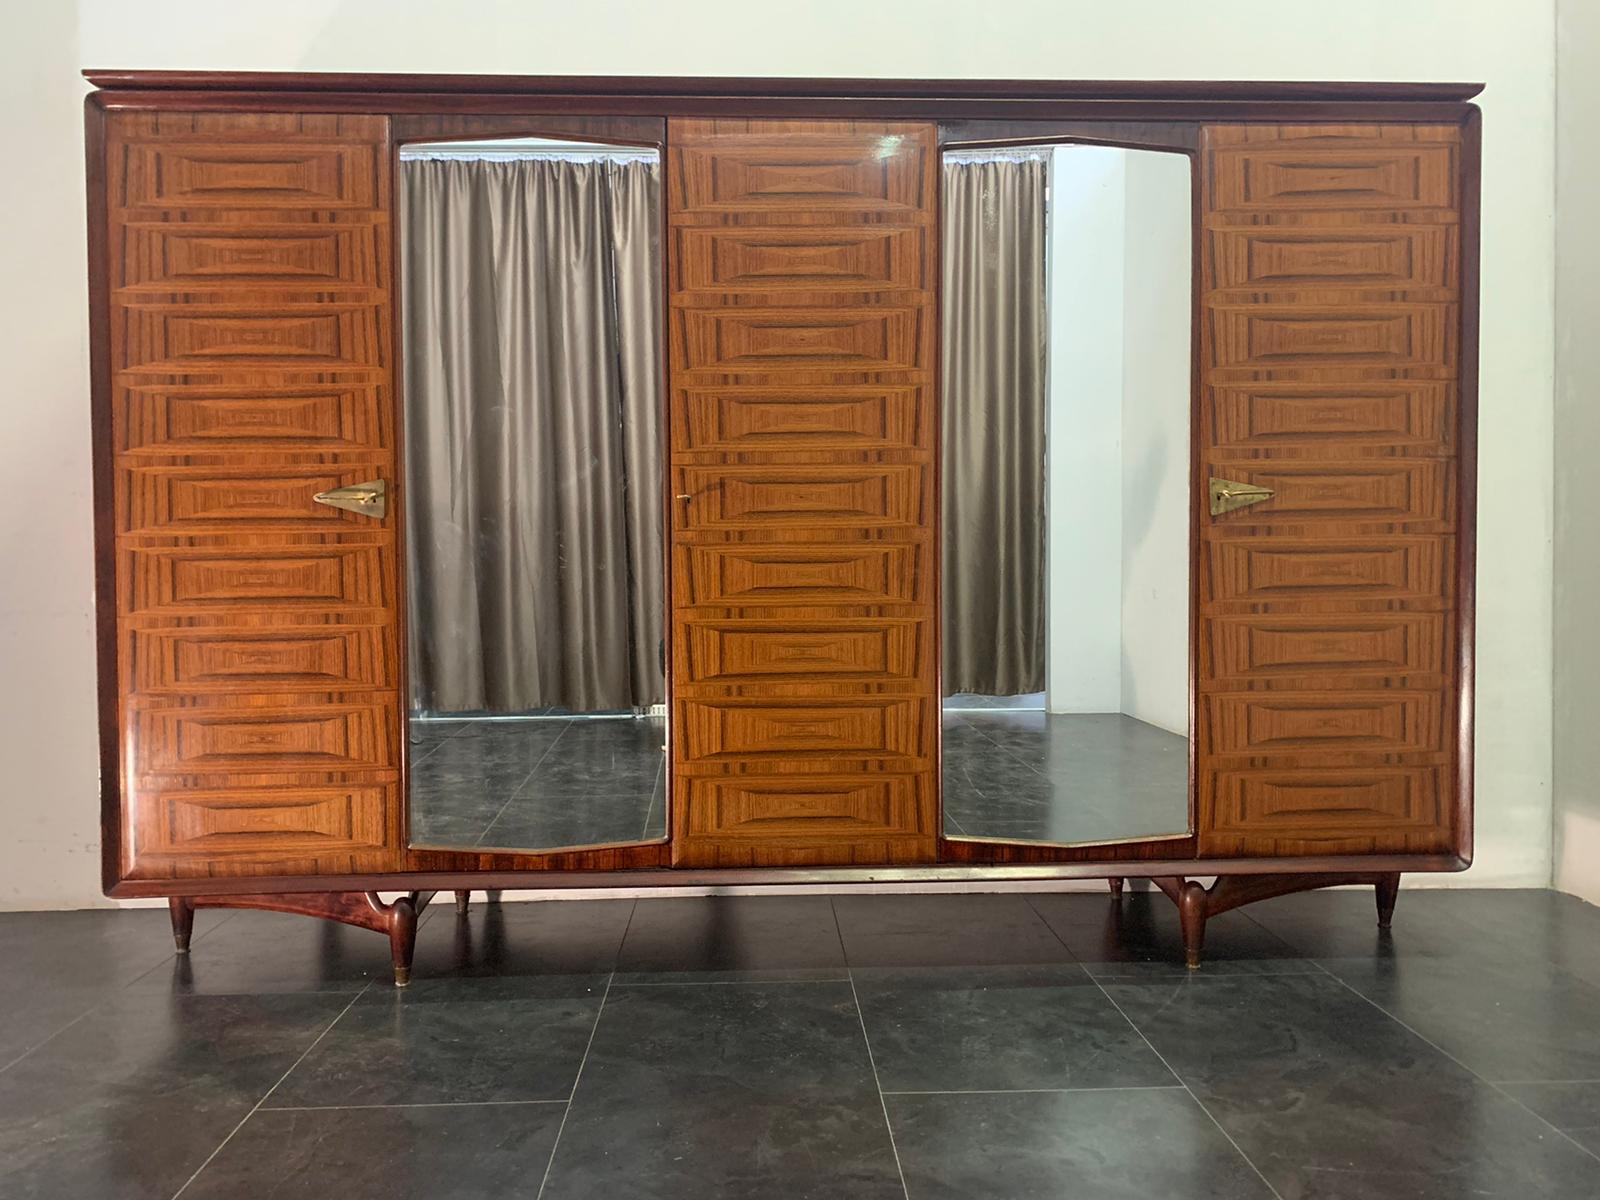 Closet of great quality brings 2 mirrors in the center, the doors are rounded and finely inlaid with veins of rosewood selection, geometric designs, create a luxurious optical effect, the doors are enclosed in a frame of solid rosewood rounded